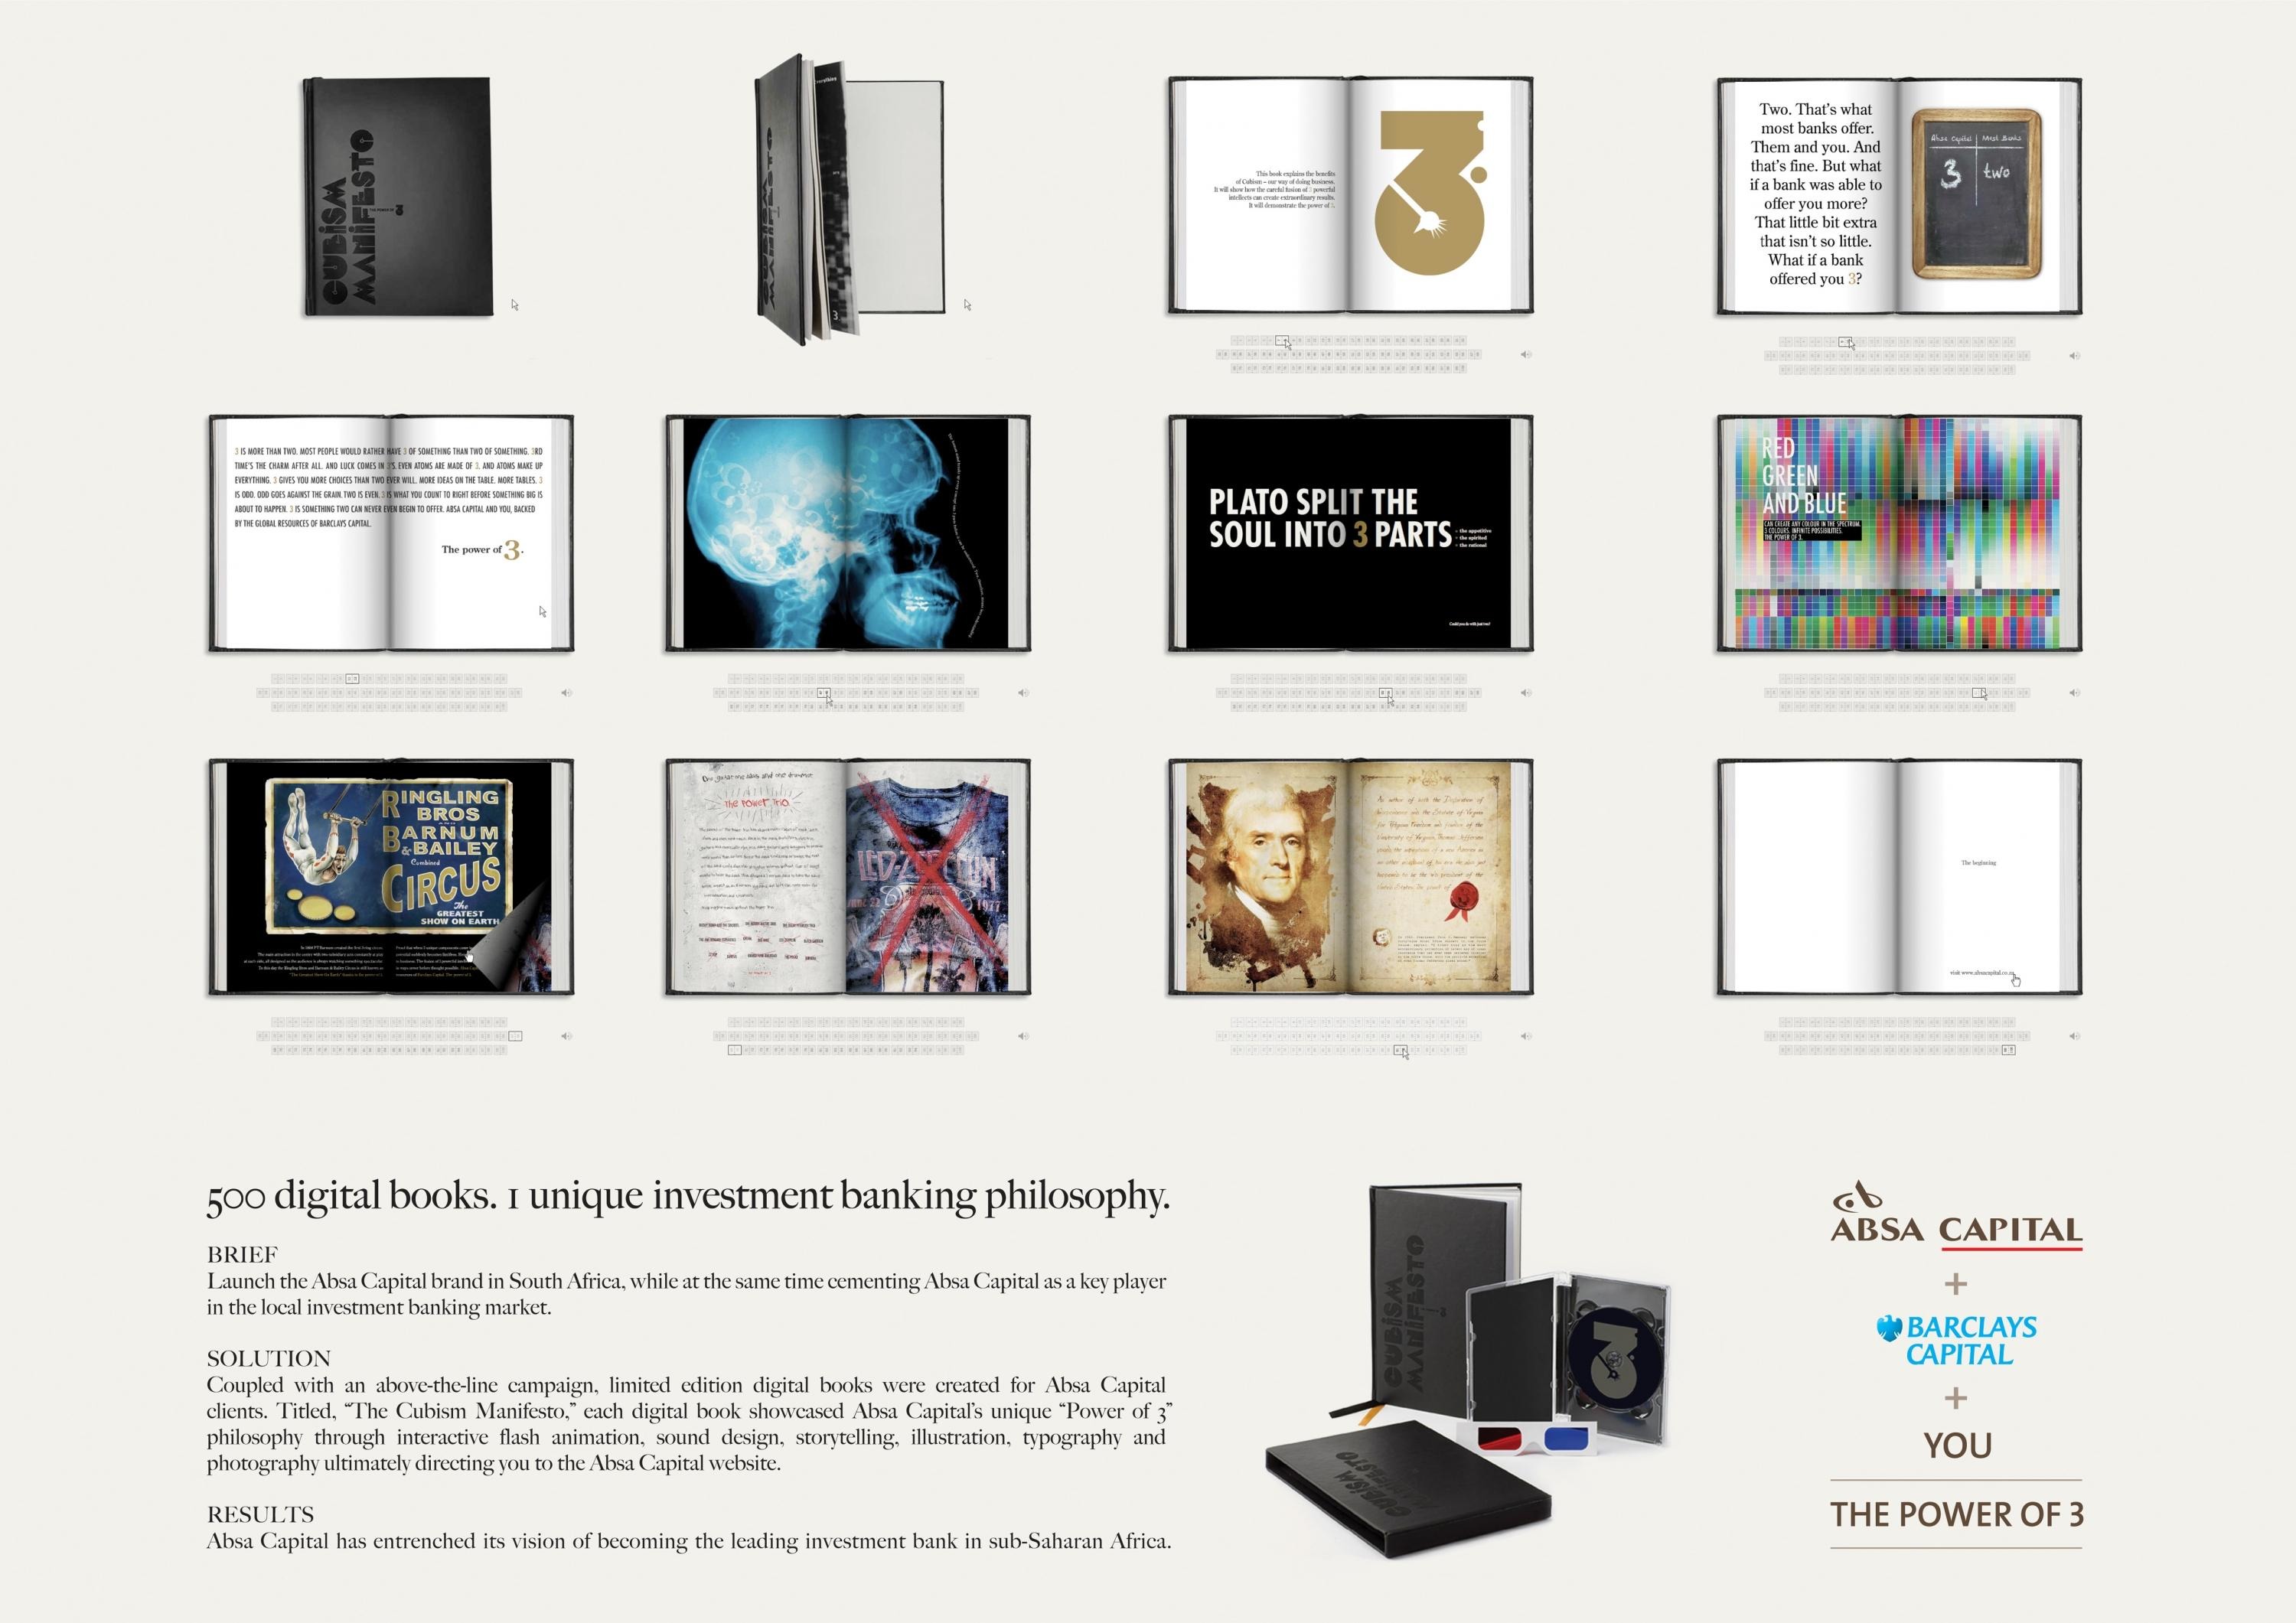 A DIGITAL BOOK PROMOTING INVESTMENT BANKING